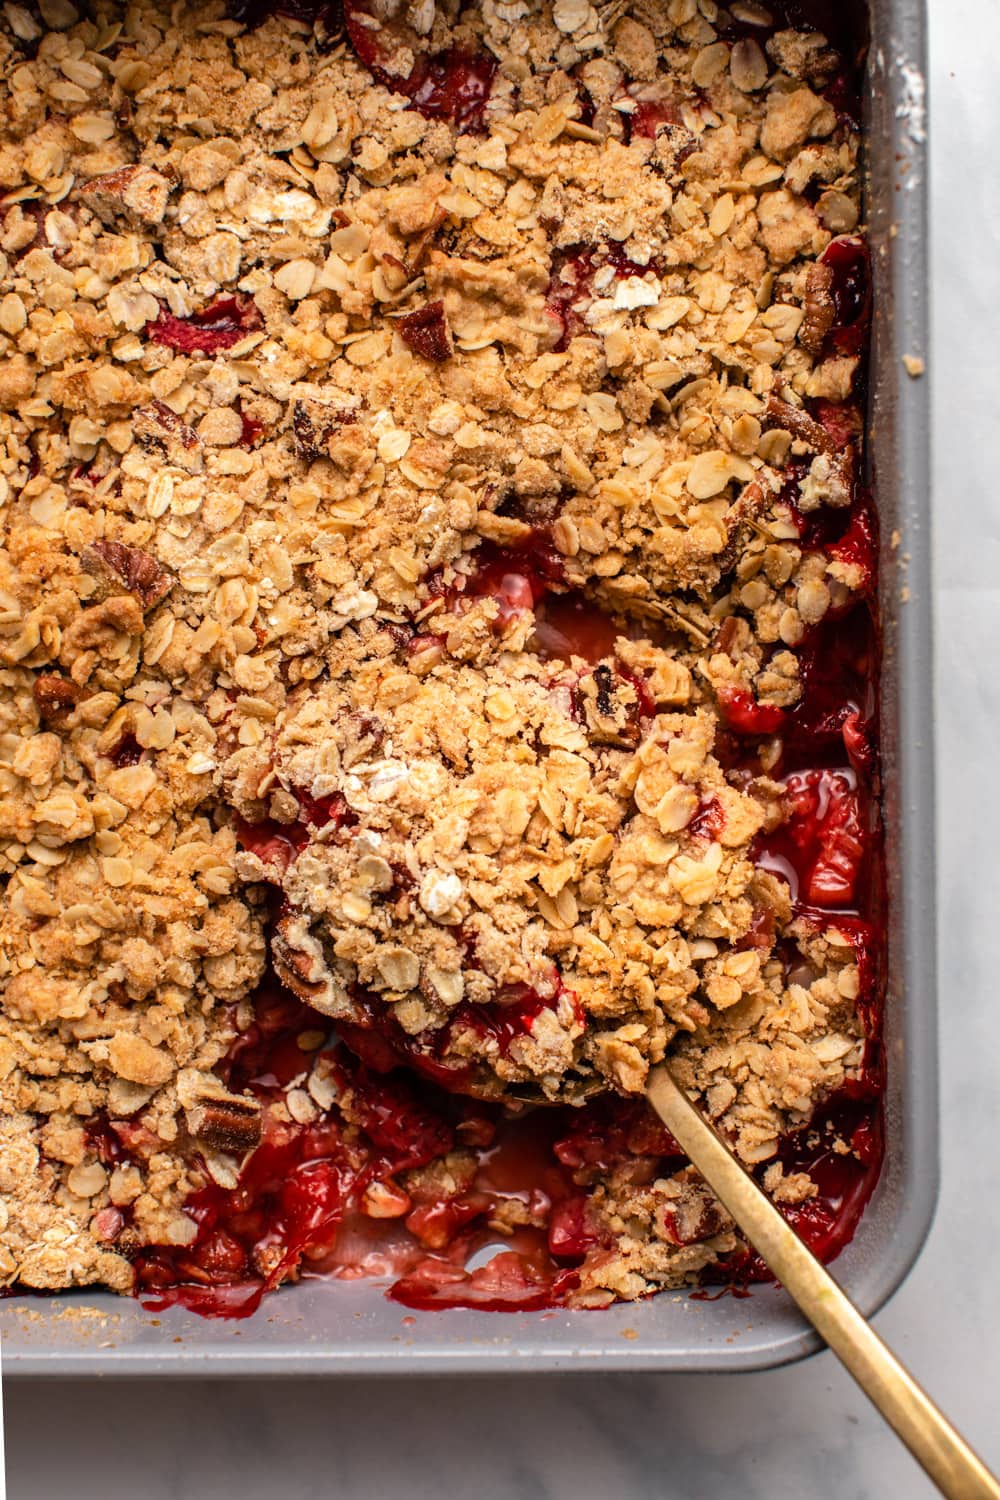 Baked strawberry rhubarb crisp with spoon taking scoop of it out